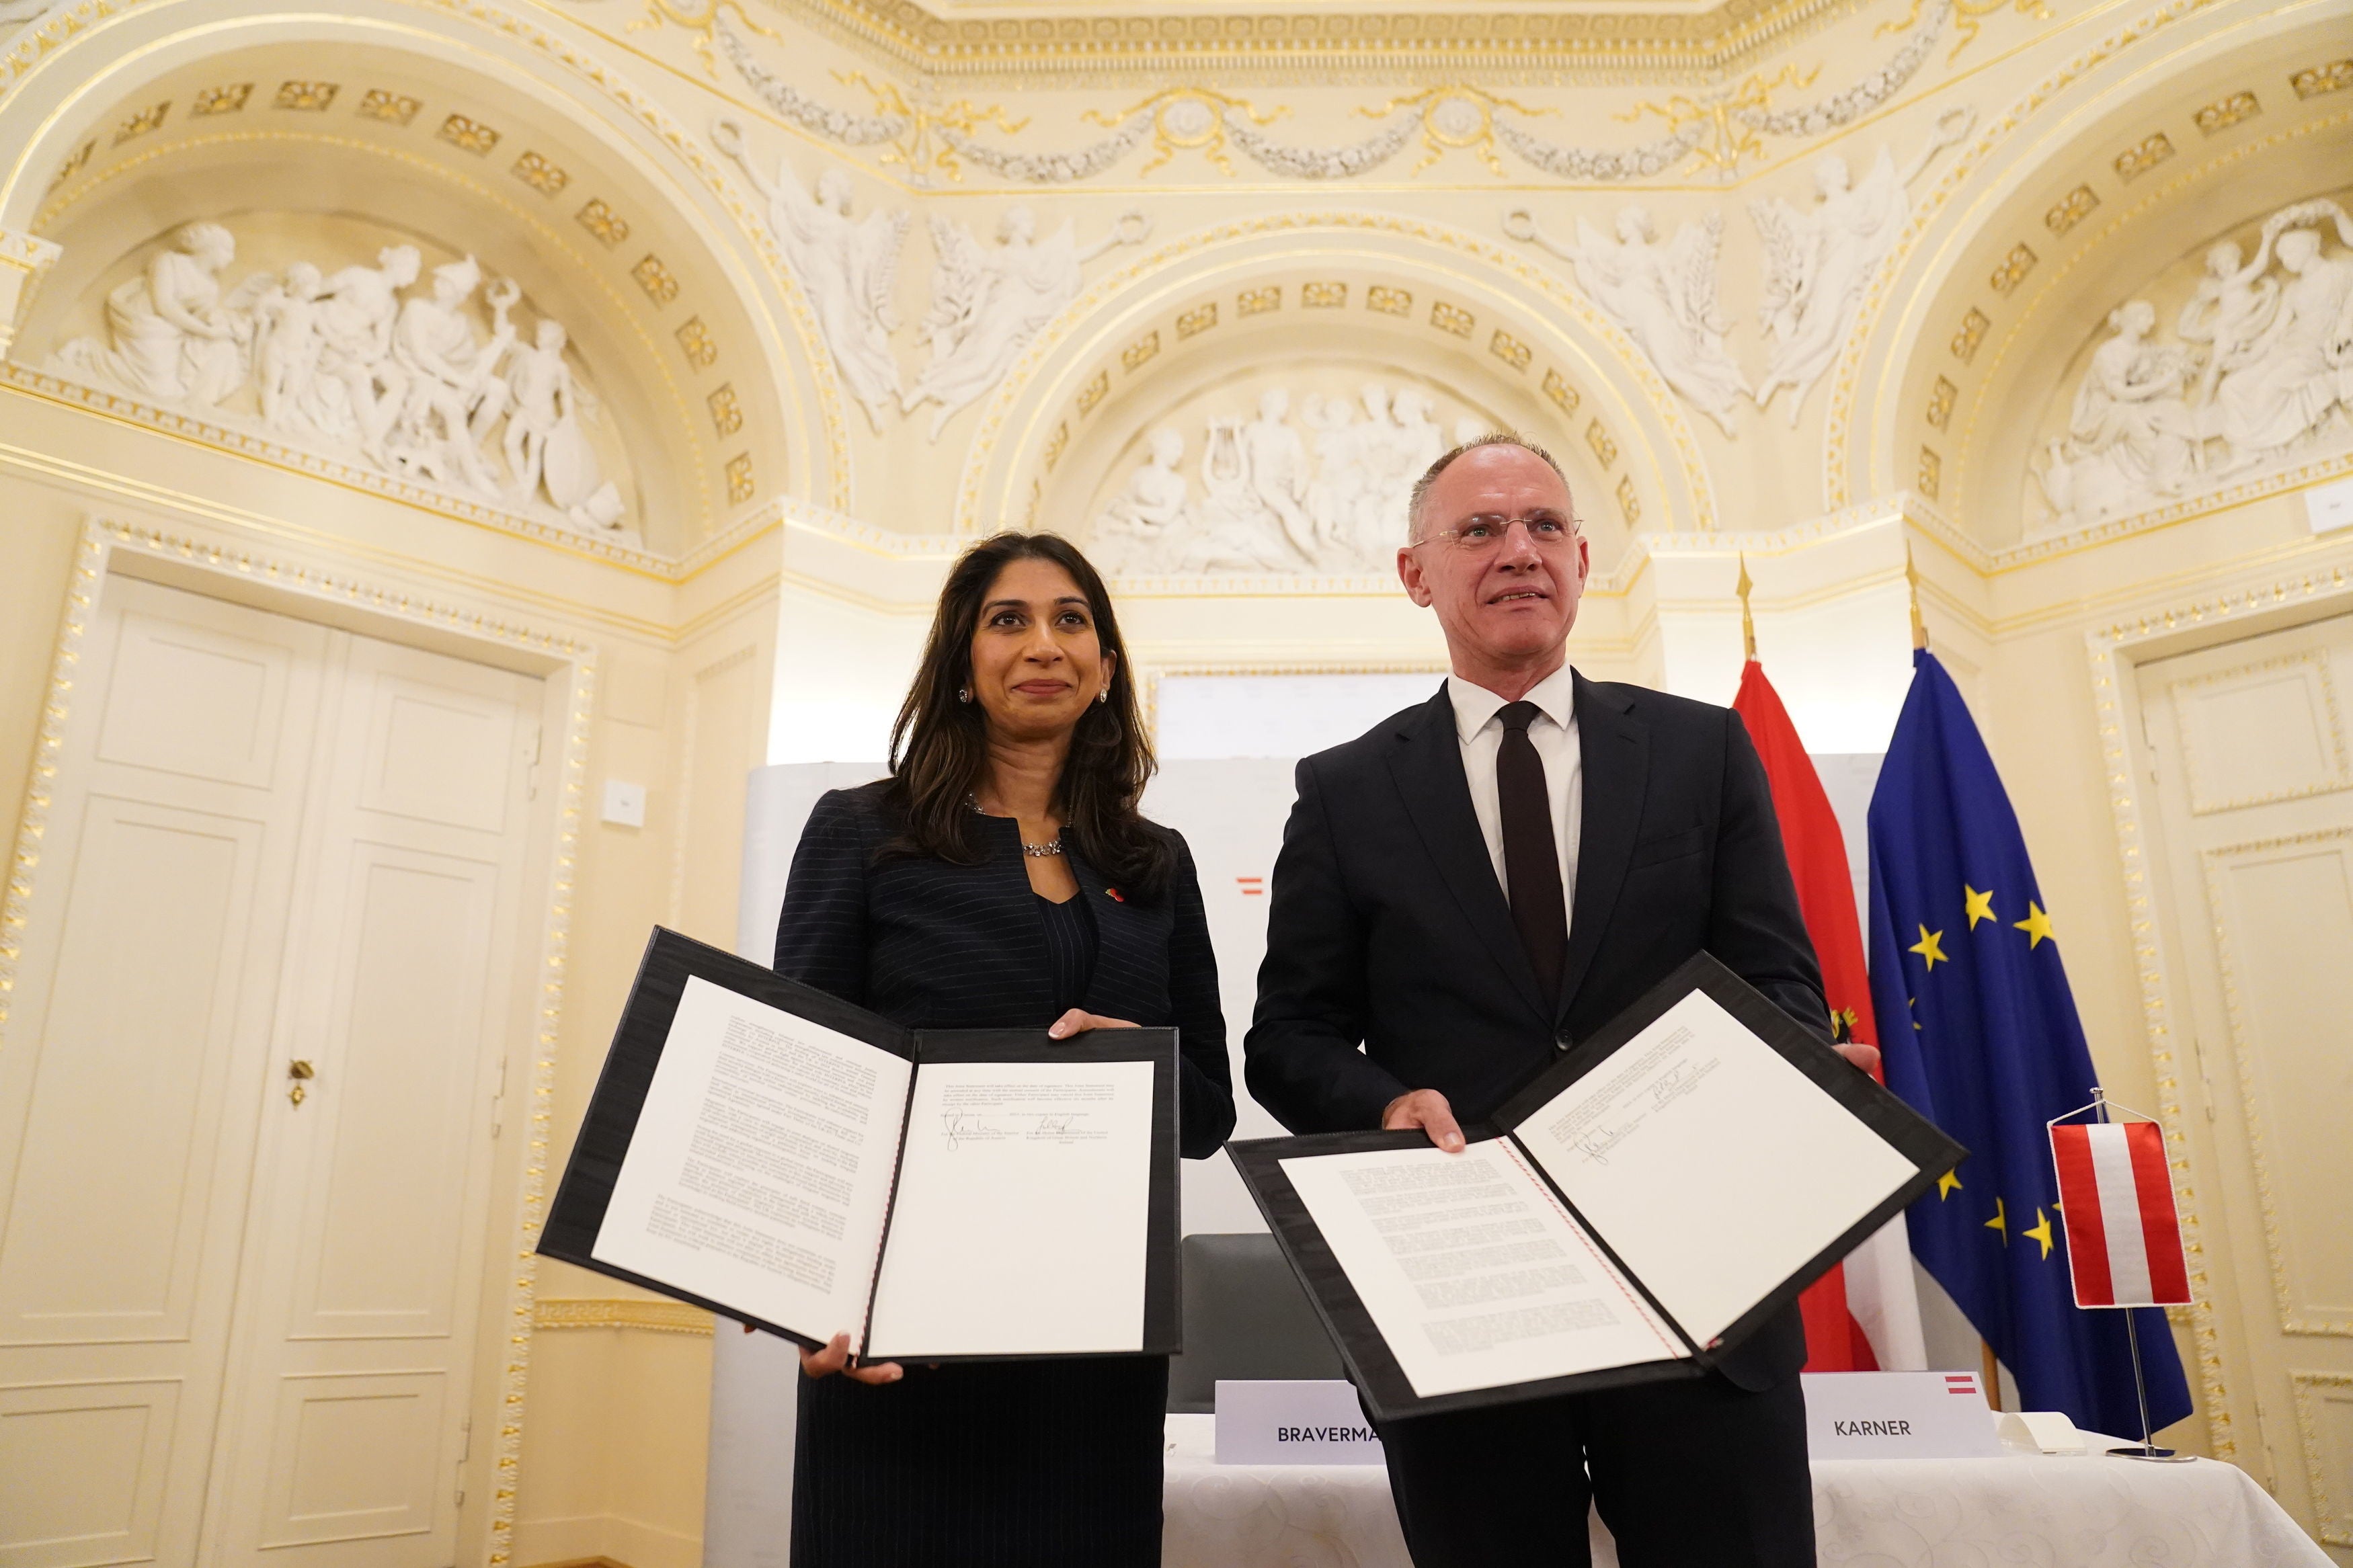 Home Secretary Suella Braverman signs a joint statement on migration and security with Austria's Interior Minister Gerhard Karner in Vienna, Austria.